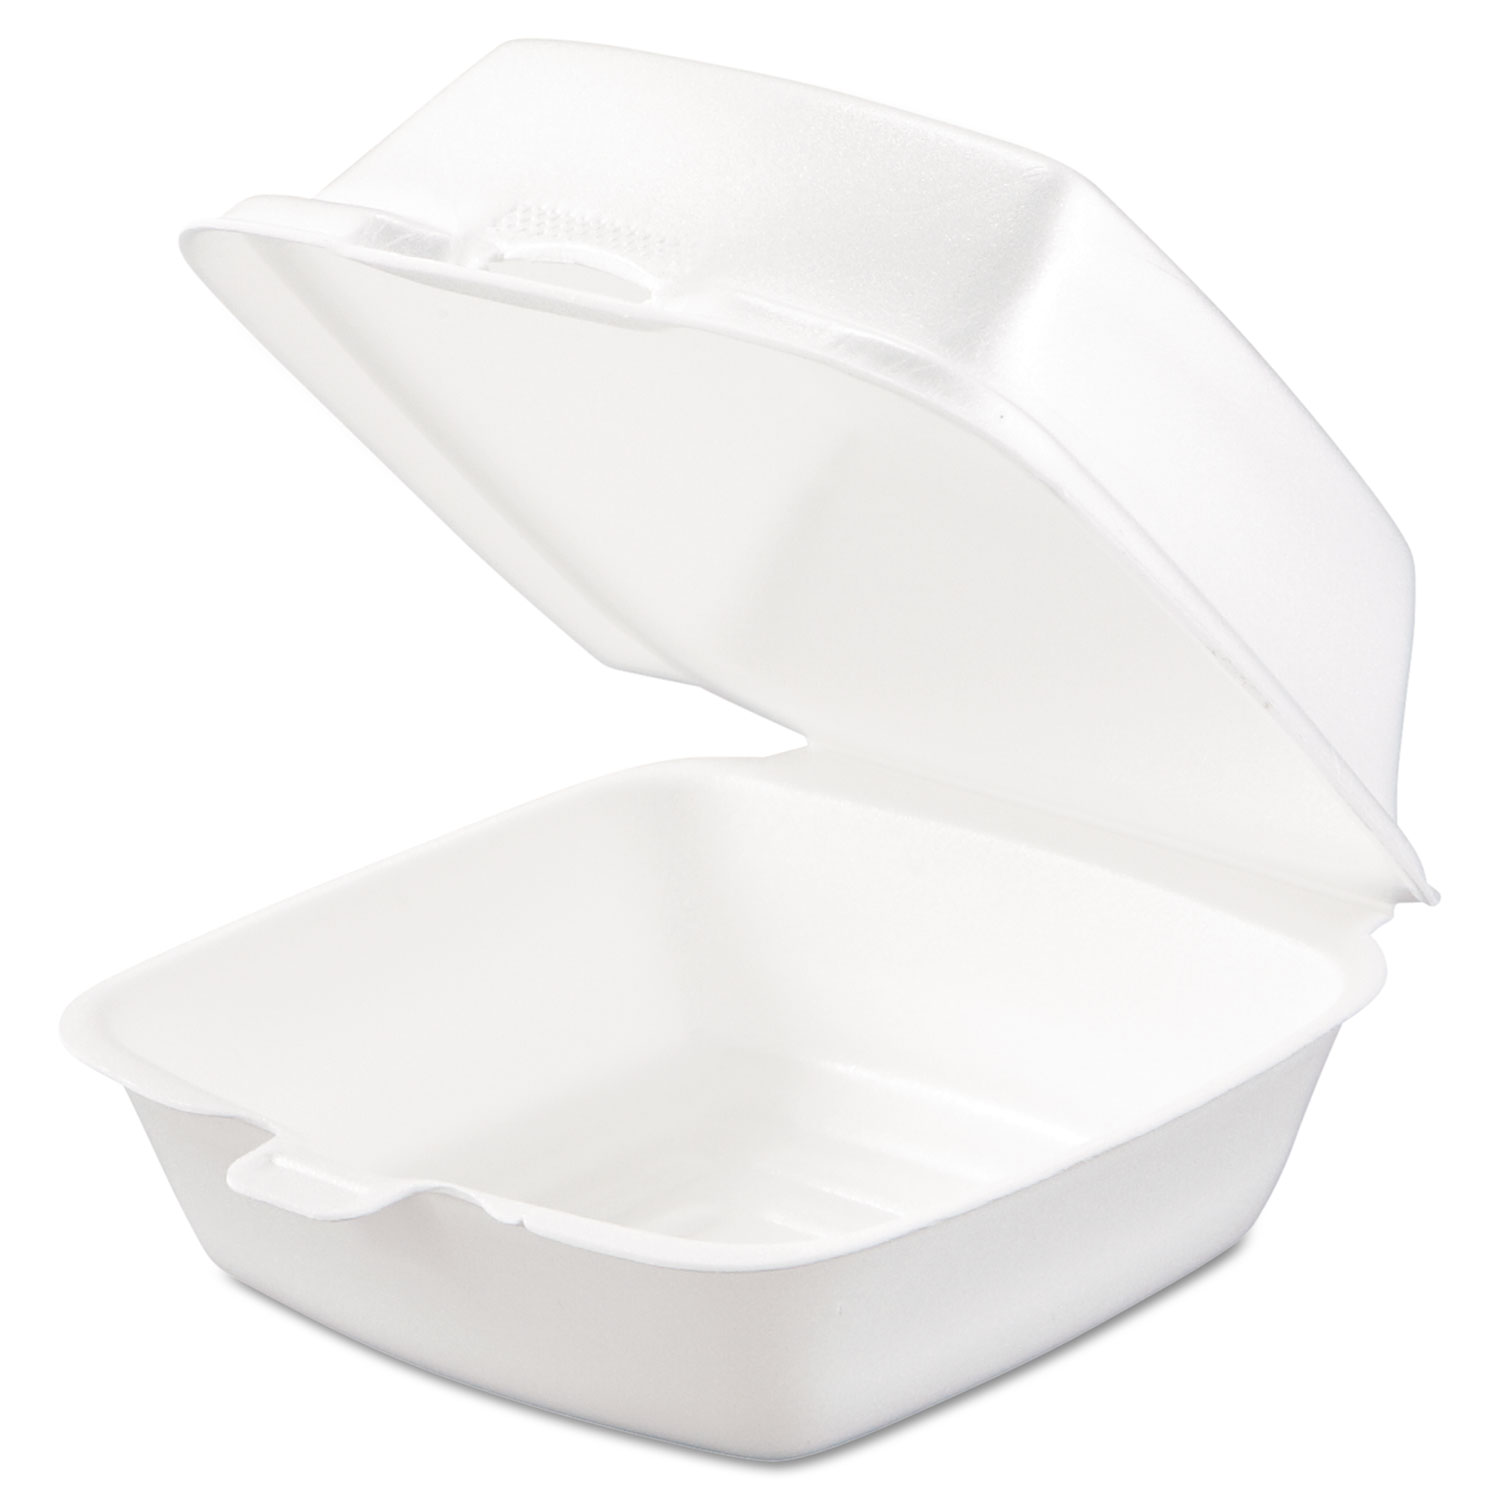 Carryout Food Container, Foam, 1-Comp, 5 1/2 x 5 3/8 x 2 7/8, White, 500/Carton